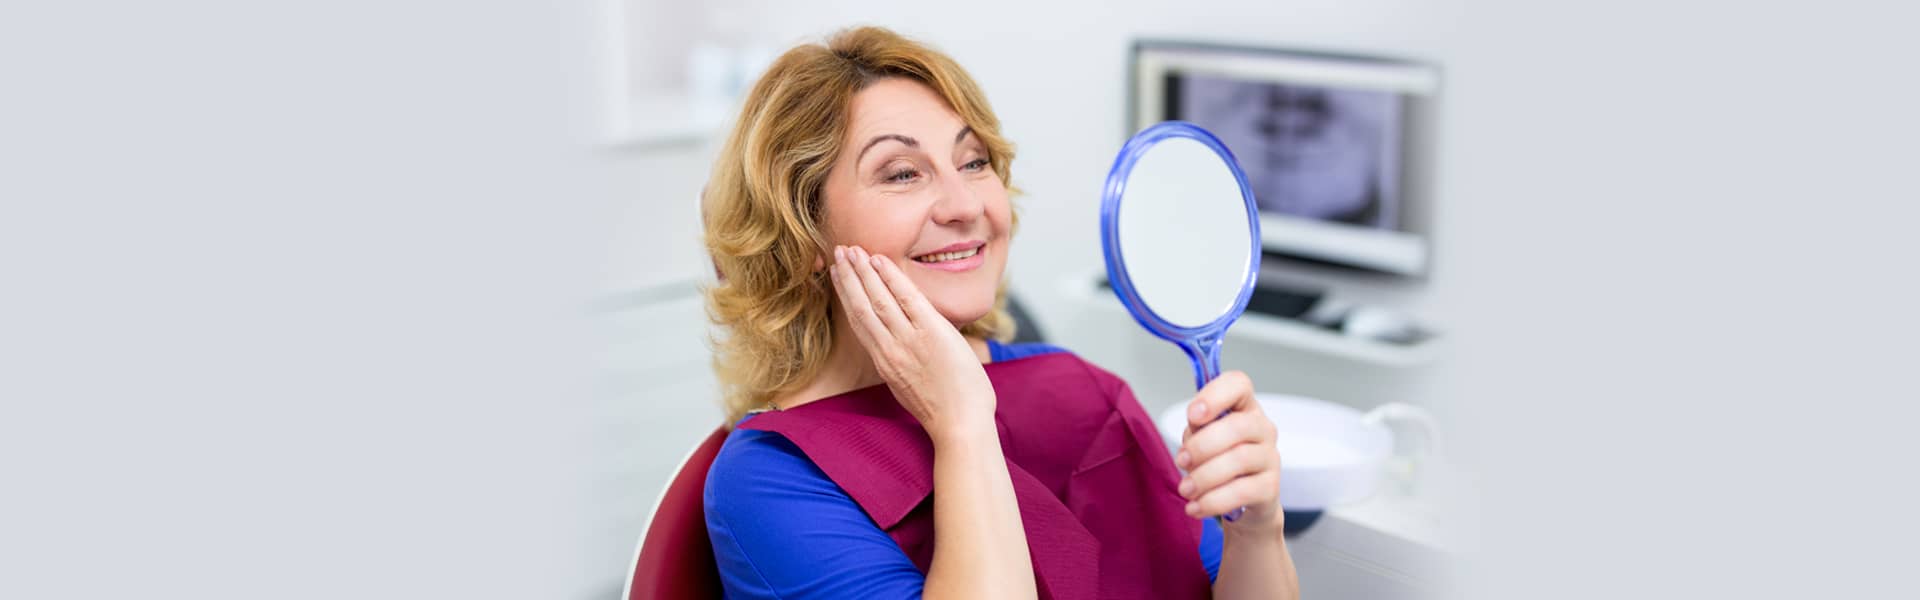 How to Care for Your Dental Fillings to Ensure Longevity